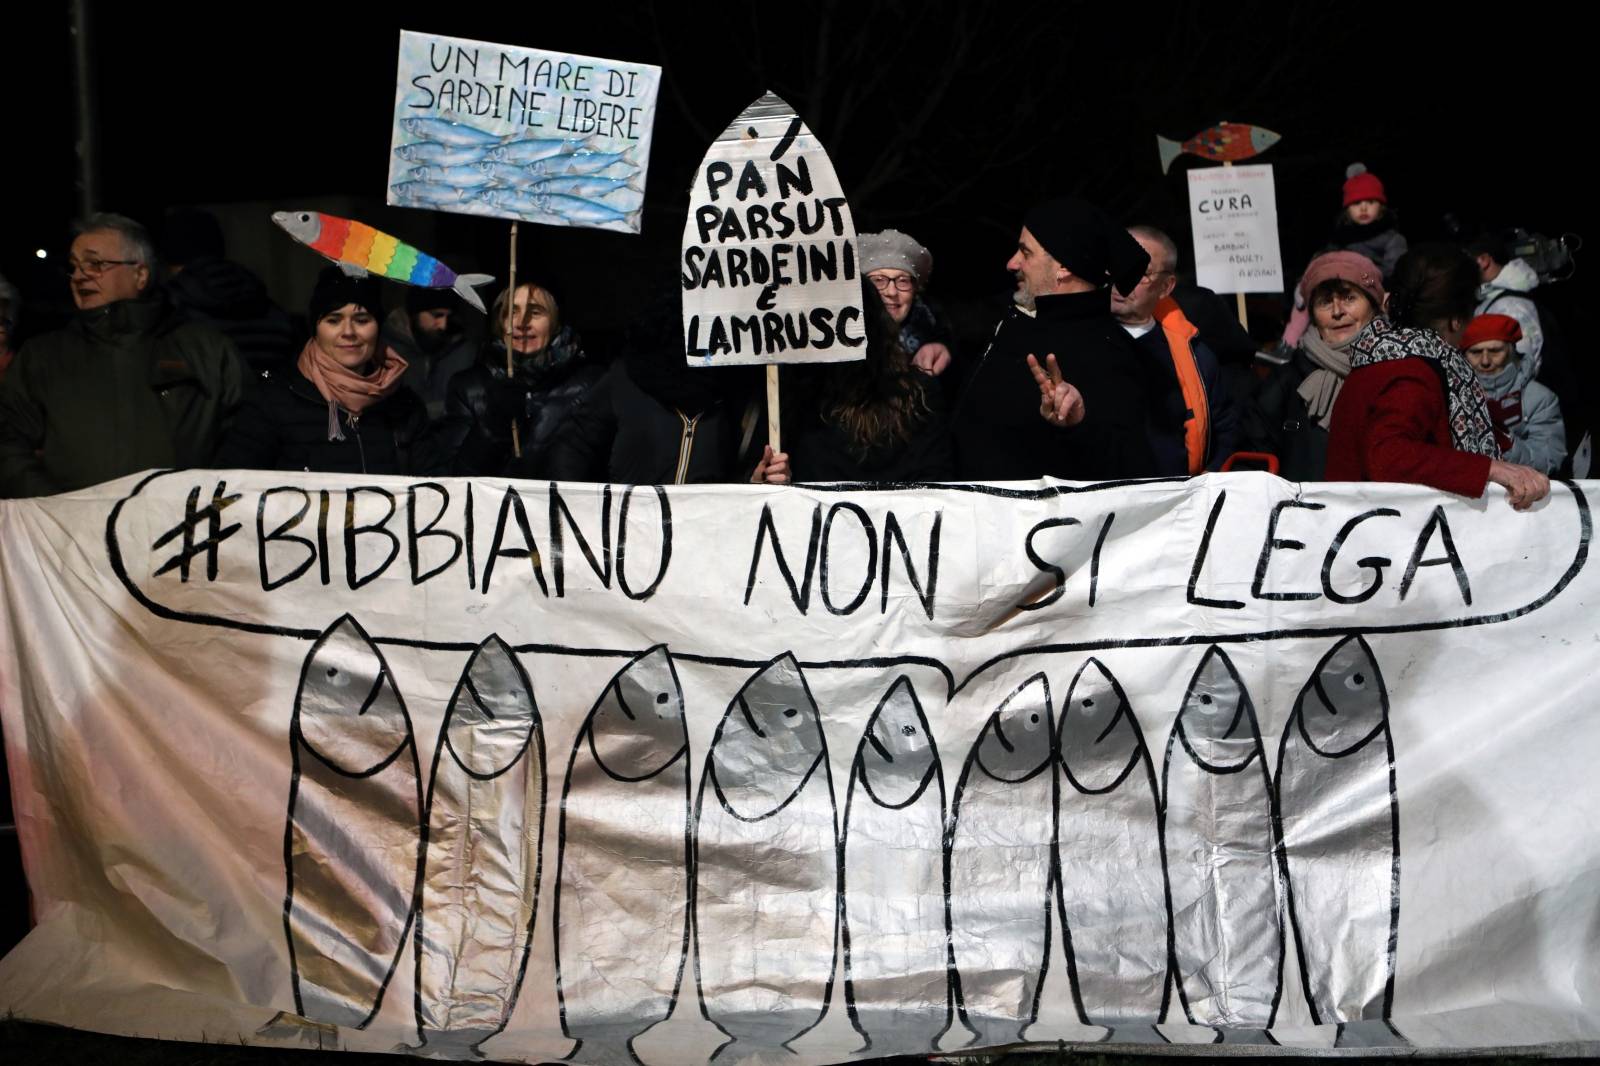 Supporters of 'the sardines', a grassroots movement against far-right League leader Matteo Salvini, hold placards and a banner during a demonstration in Bibbiano